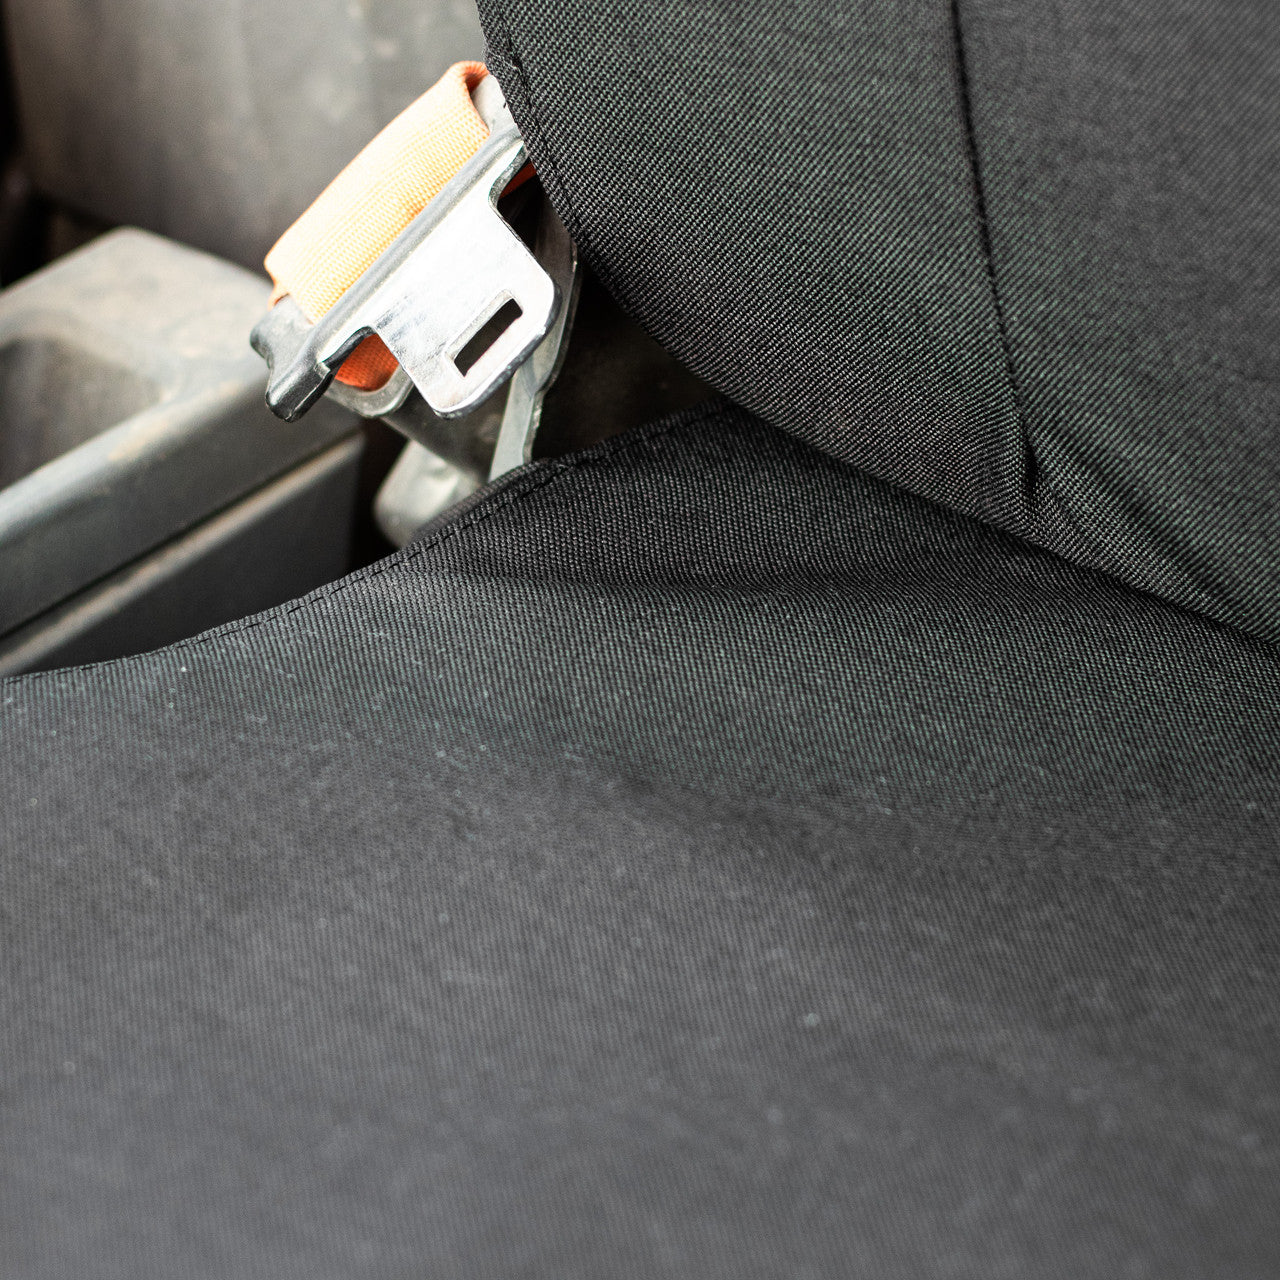 Seat cover is built from ultra durable 1000 denier Cordura